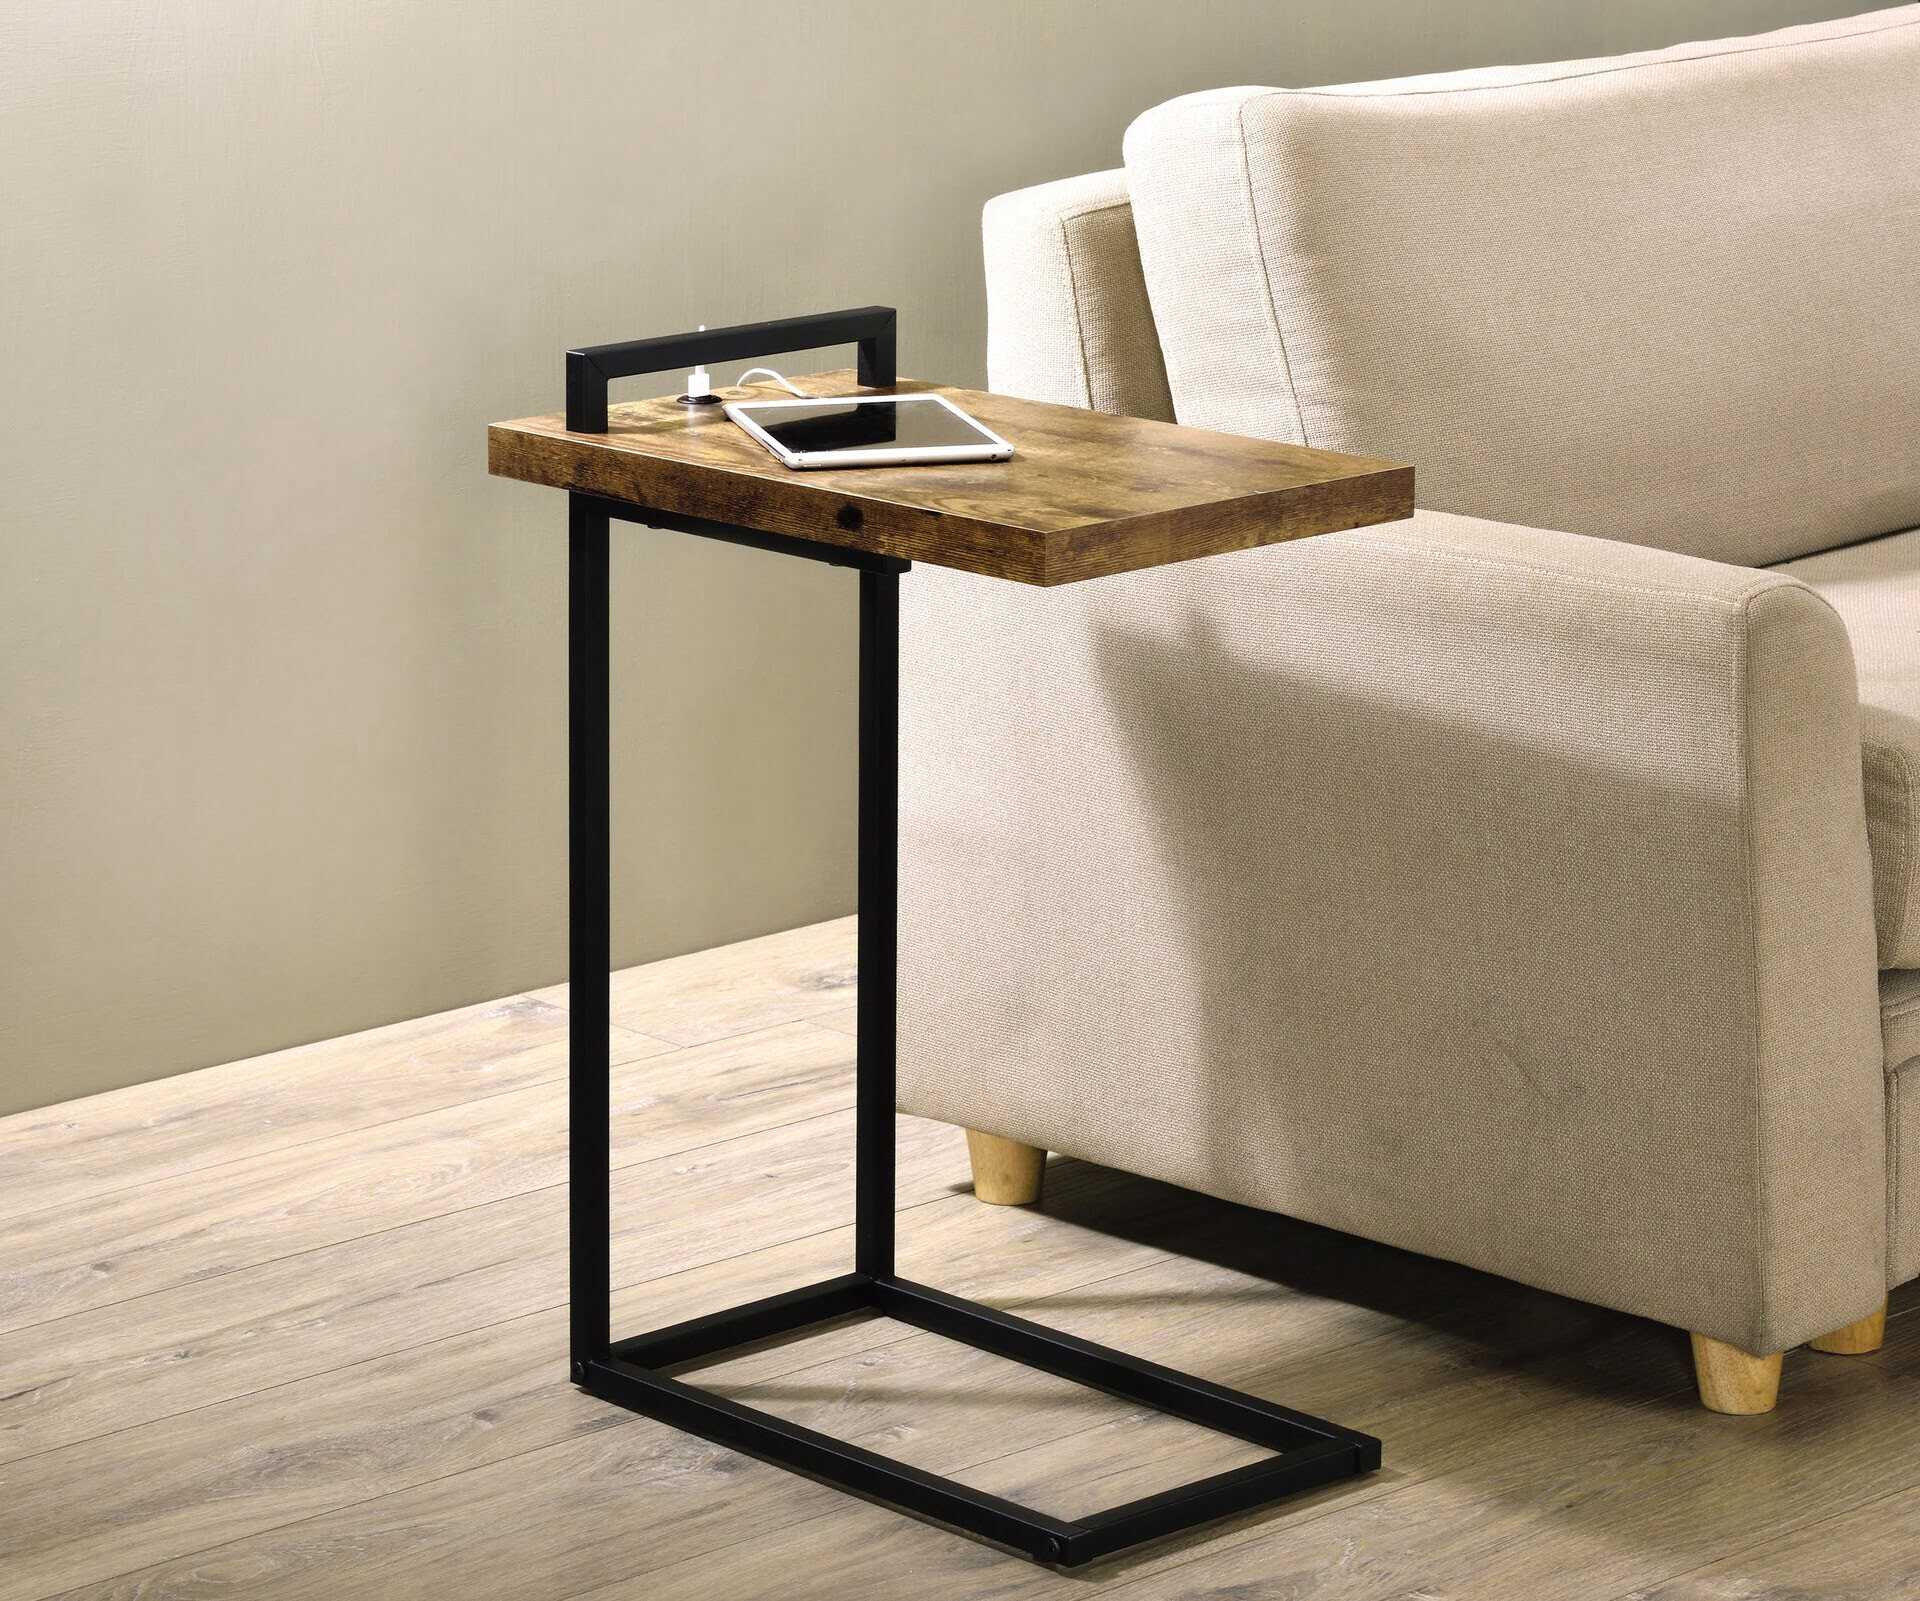 How To Build Your Own C-Style End Table